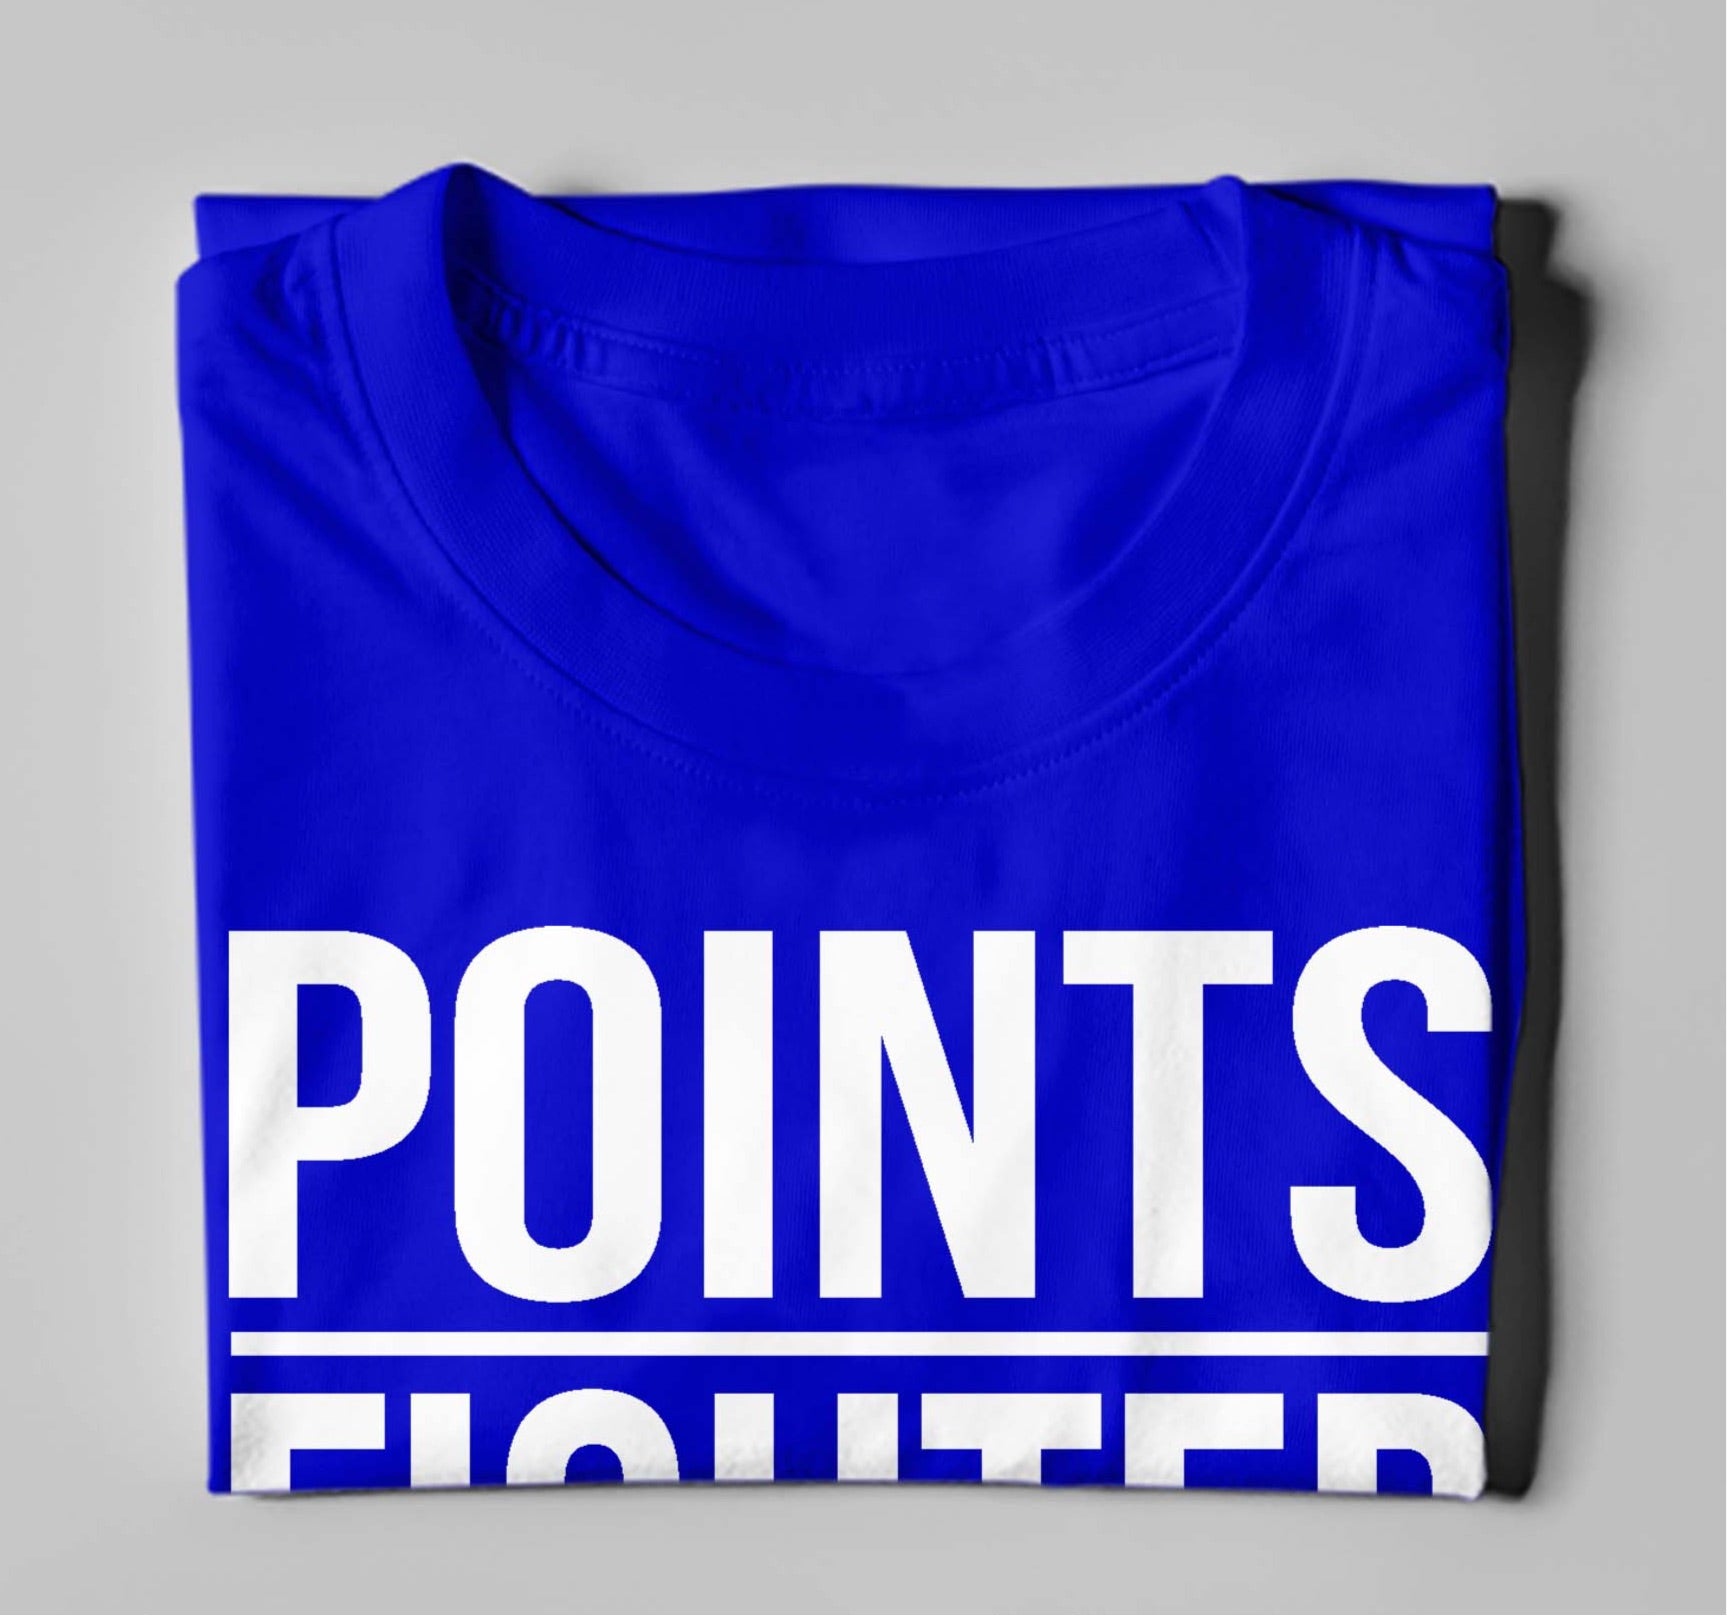 Points Fighter T-Shirt - Royal Blue